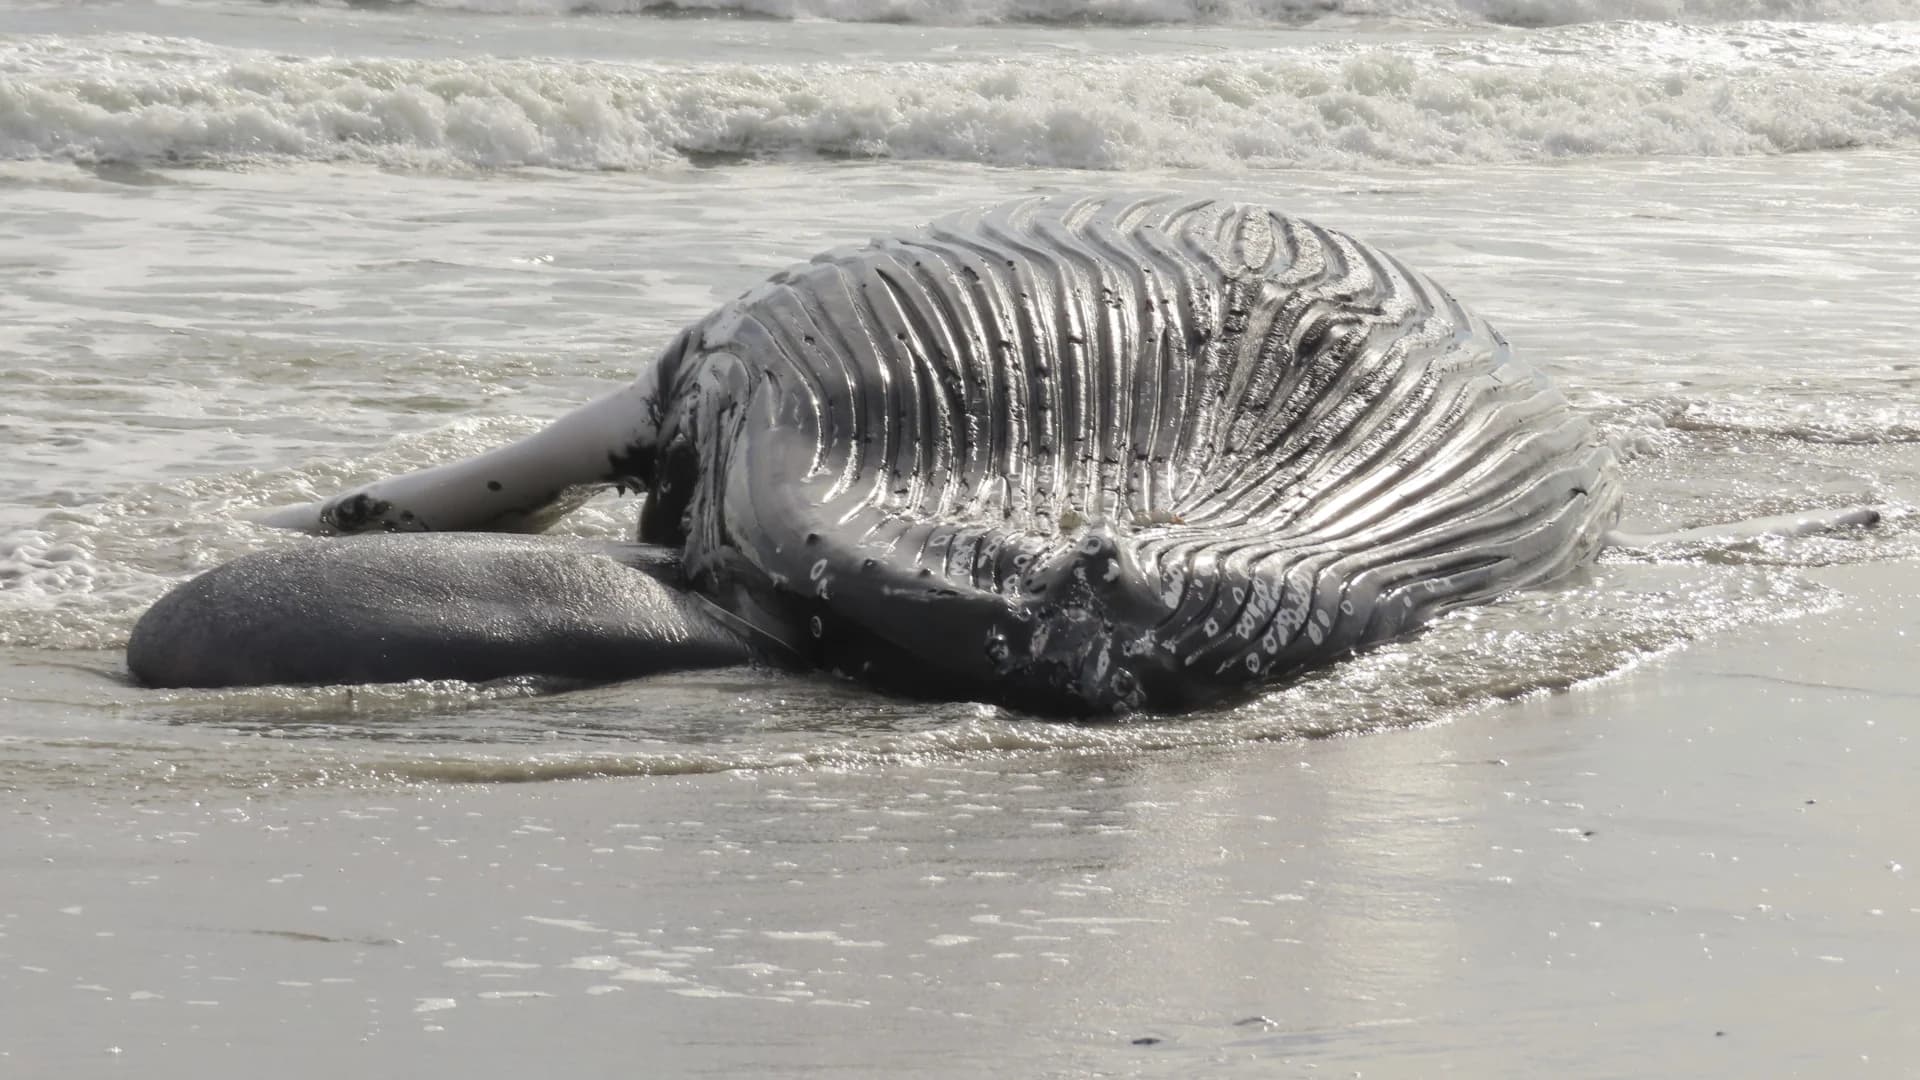 Feds: Offshore wind power industry not to blame for East Coast whale deaths